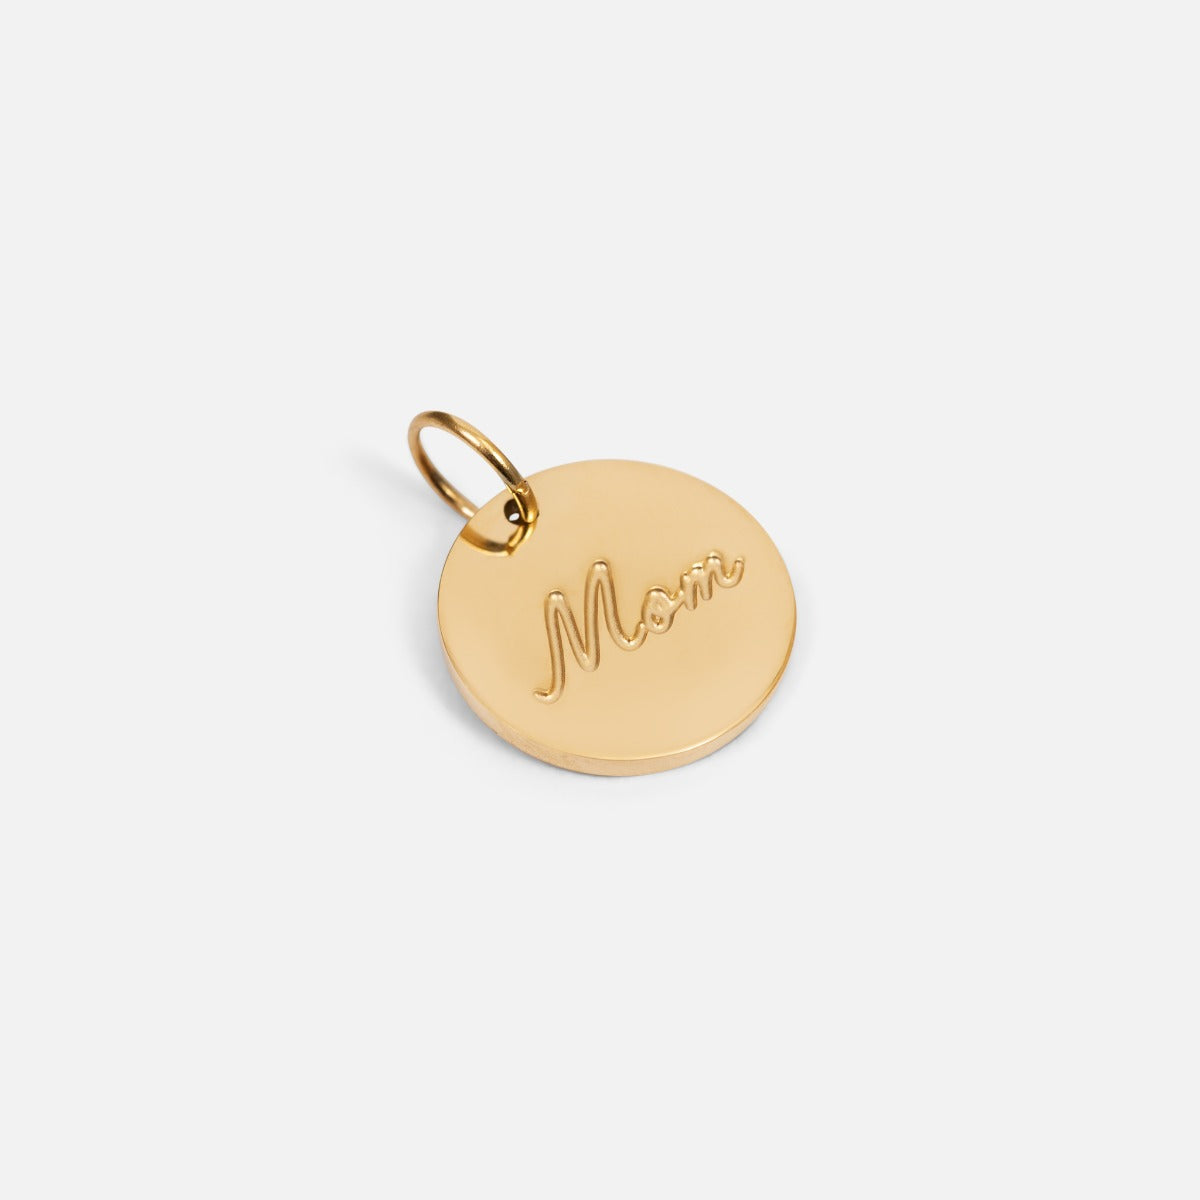 Small symbolic golden charm engraved "mom" wording